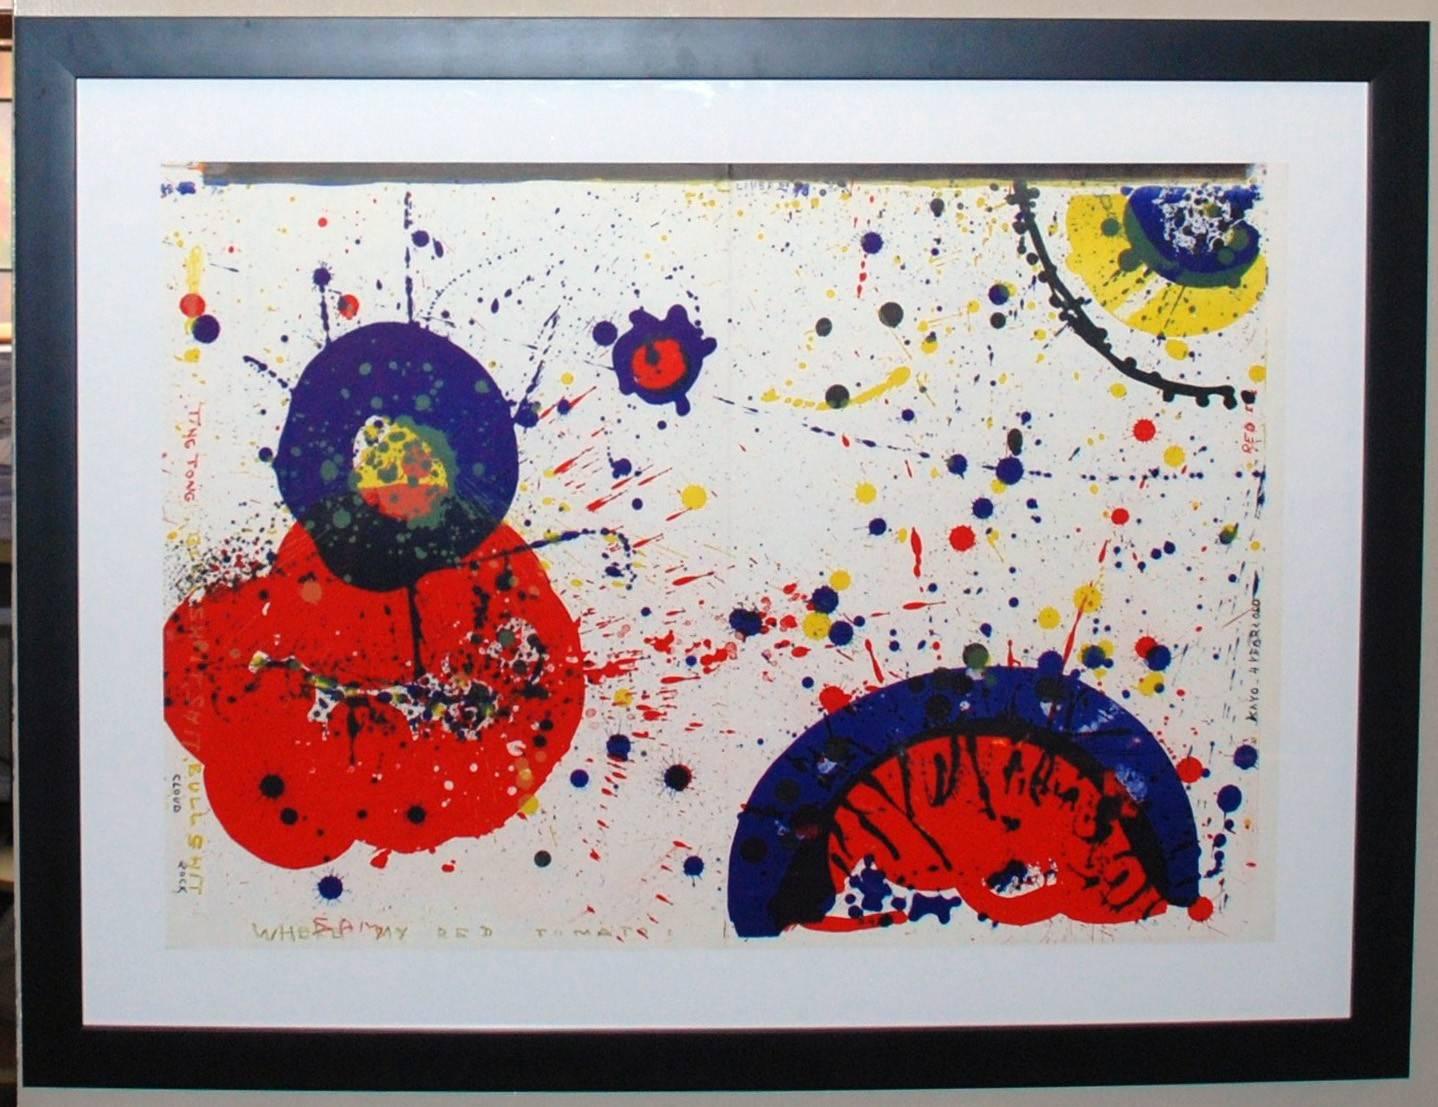 Sam Francis Abstract Print - Cloud Rock and Kayo 4 Years Old -- Red Eye, from 1¢ Life